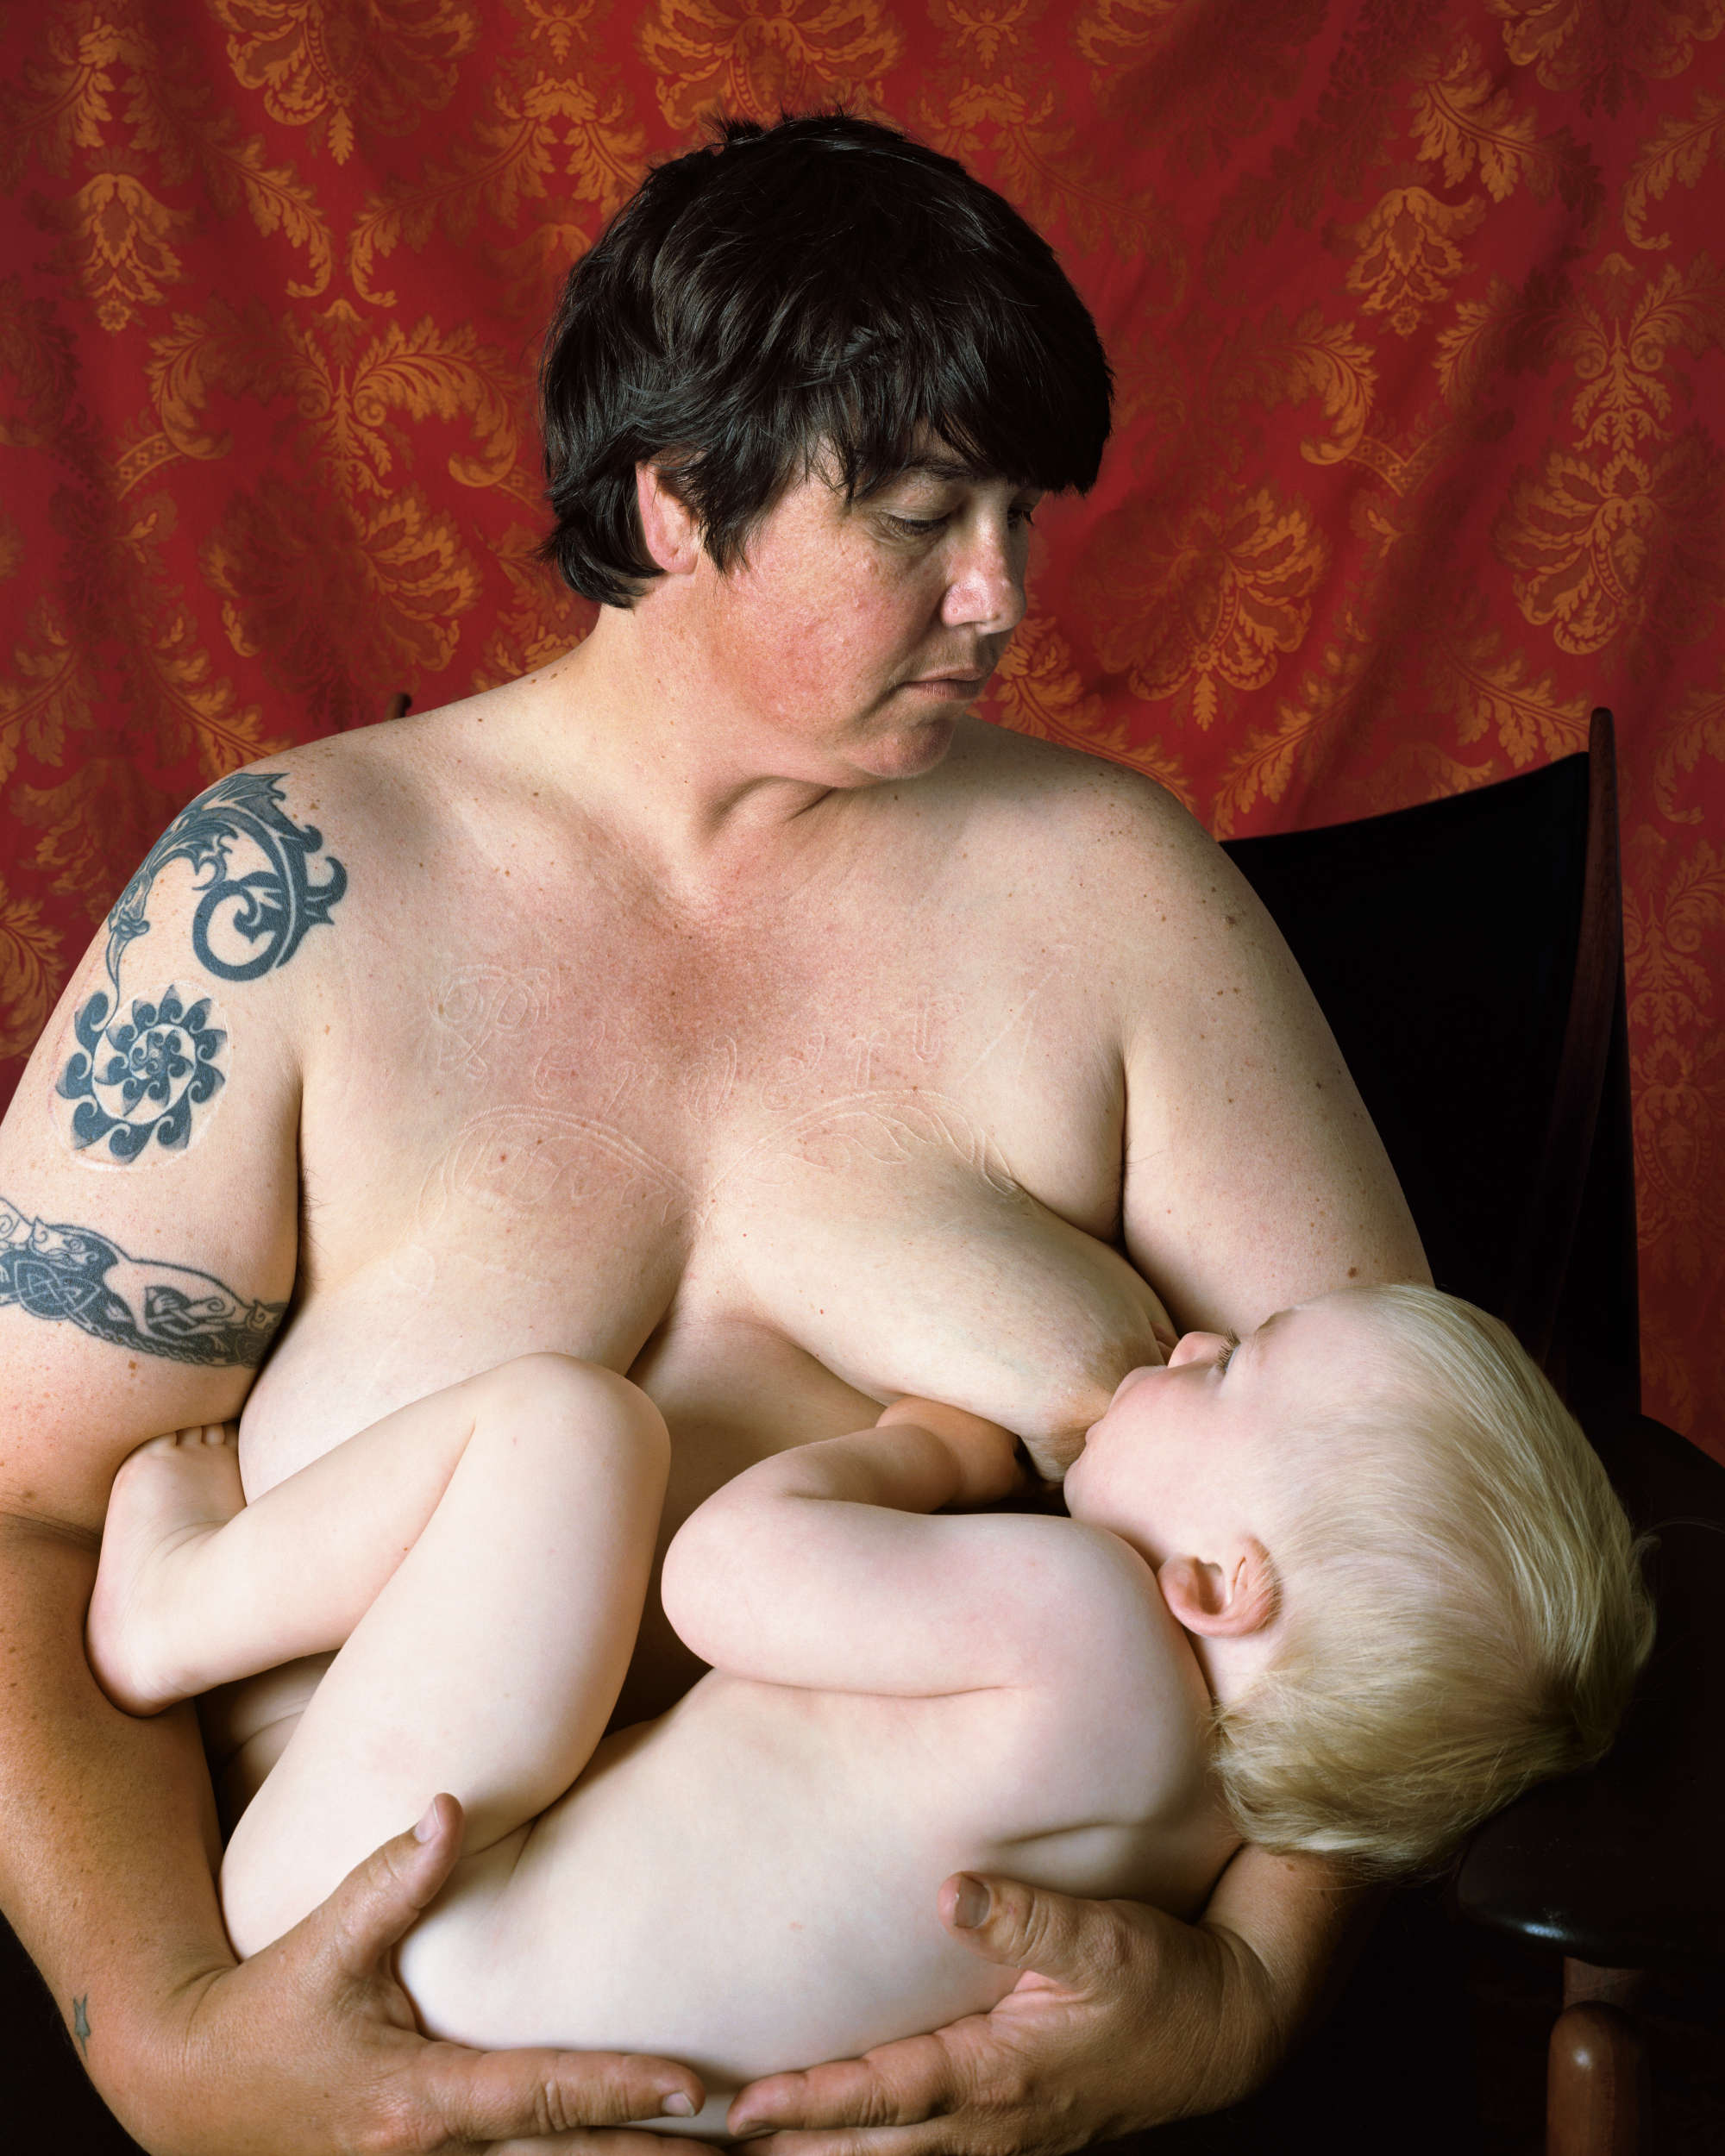 Self-Portrait/Nursing, 2004.  Chromogenic print, 40 × 32 in. (101.6 × 81.3 cm). Courtesy the artist and Regen Projects, Los Angeles; Lehmann Maupin, New York/Hong Kong/Seoul/London; Thomas Dane Gallery, London and Naples; and Peder Lund, Oslo 